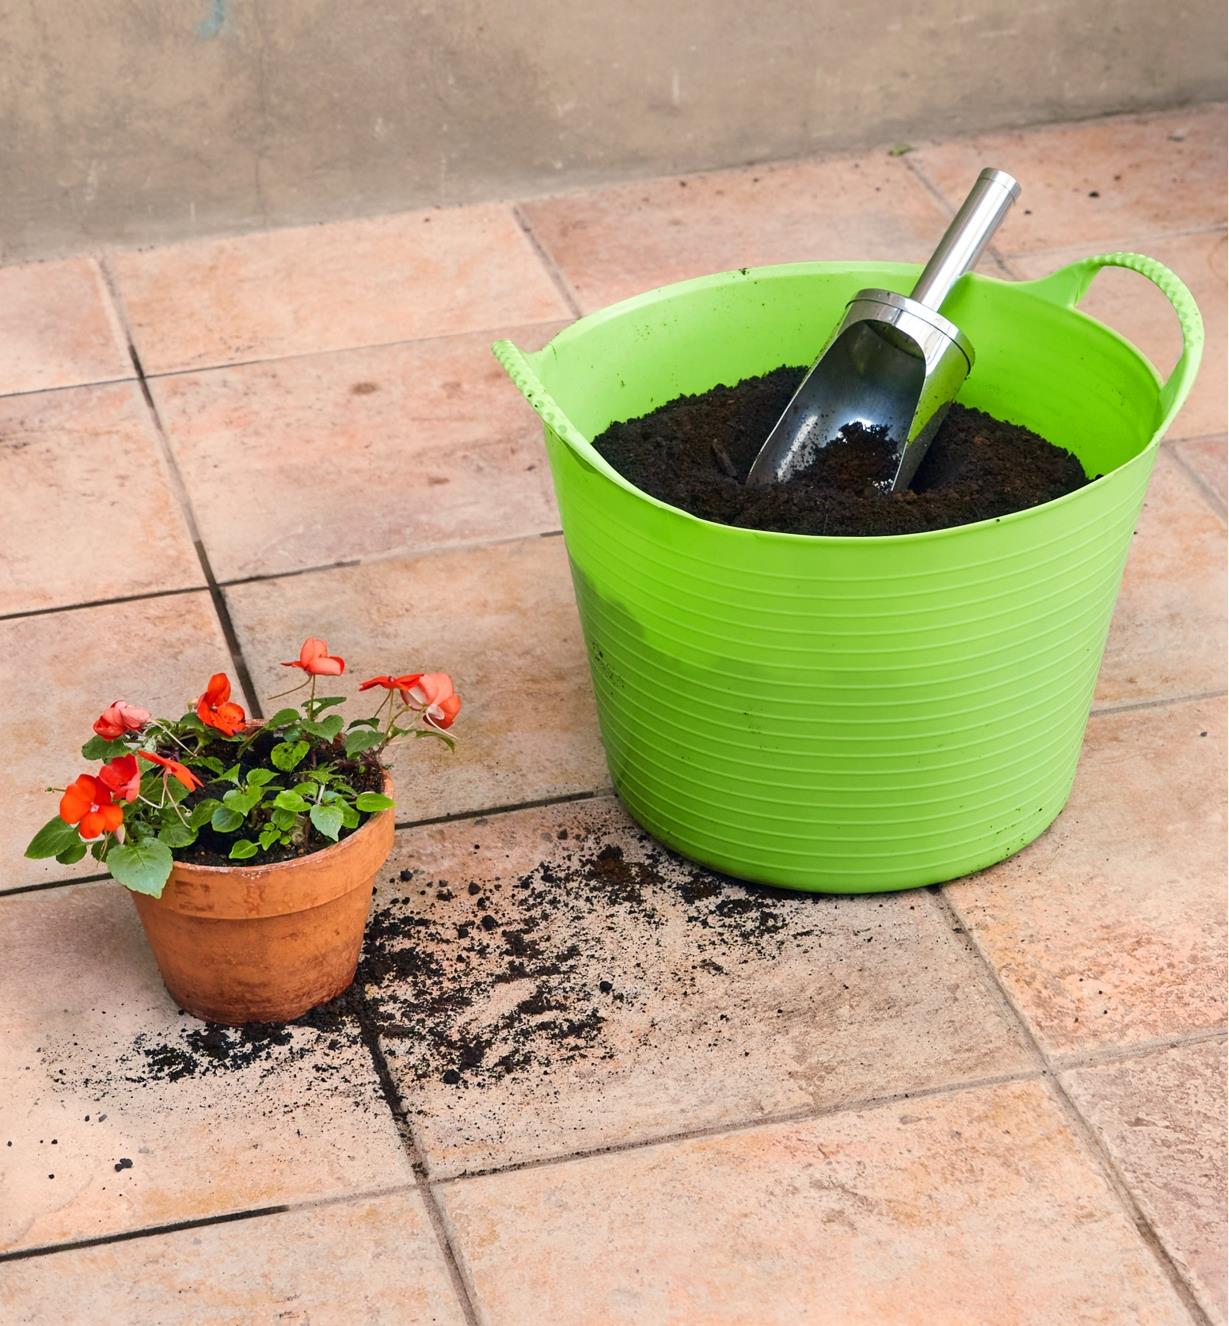 A newly potted impatiens on a tiled floor next to a 14 litre Tubtrug filled with potting soil